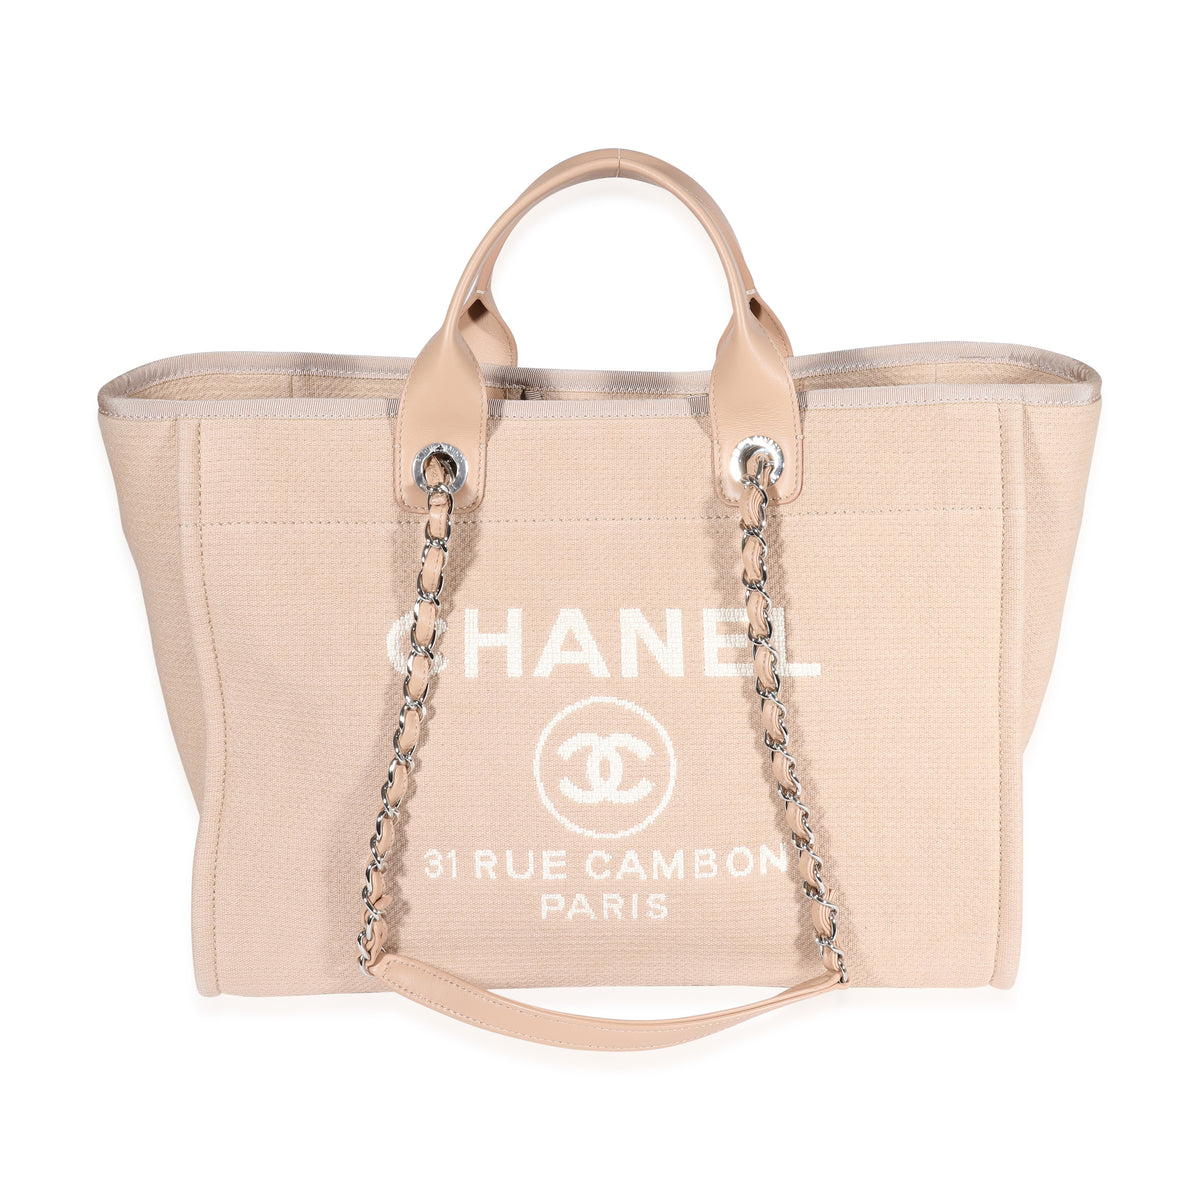 Chanel Beige Canvas & Leather Large Deauville Tote